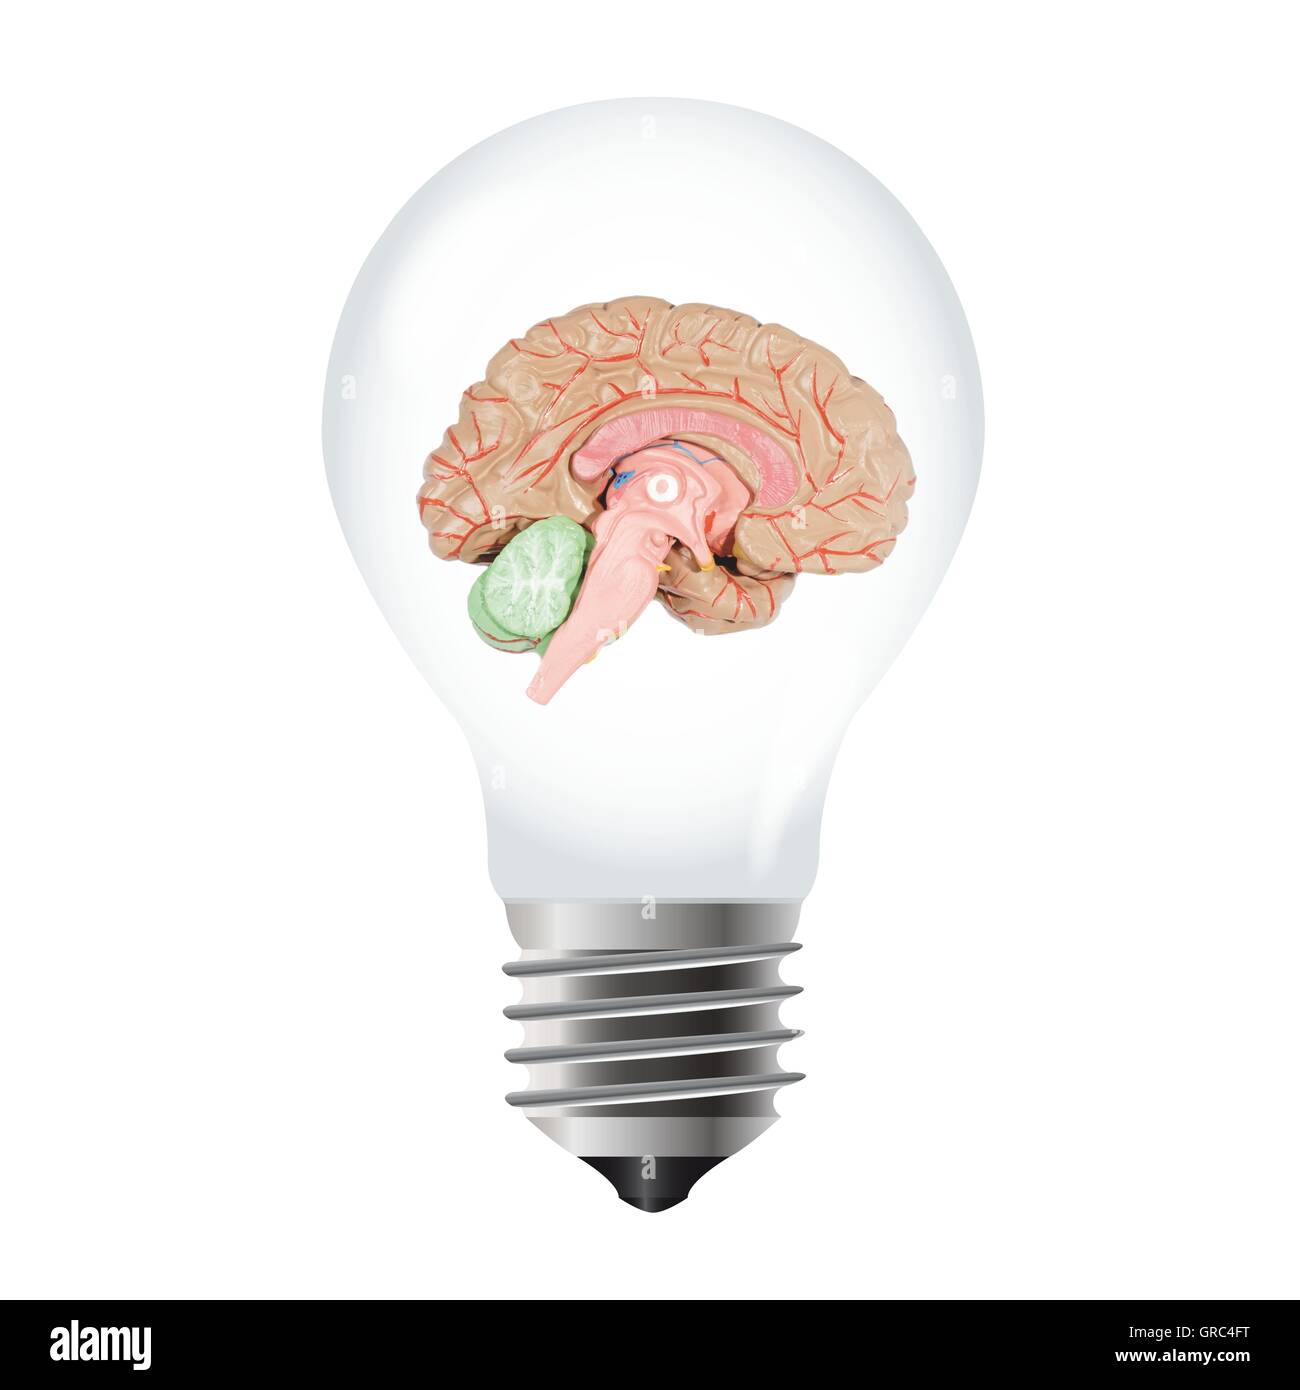 Illustration Of A Light Bulb With Human Brain Stock Photo